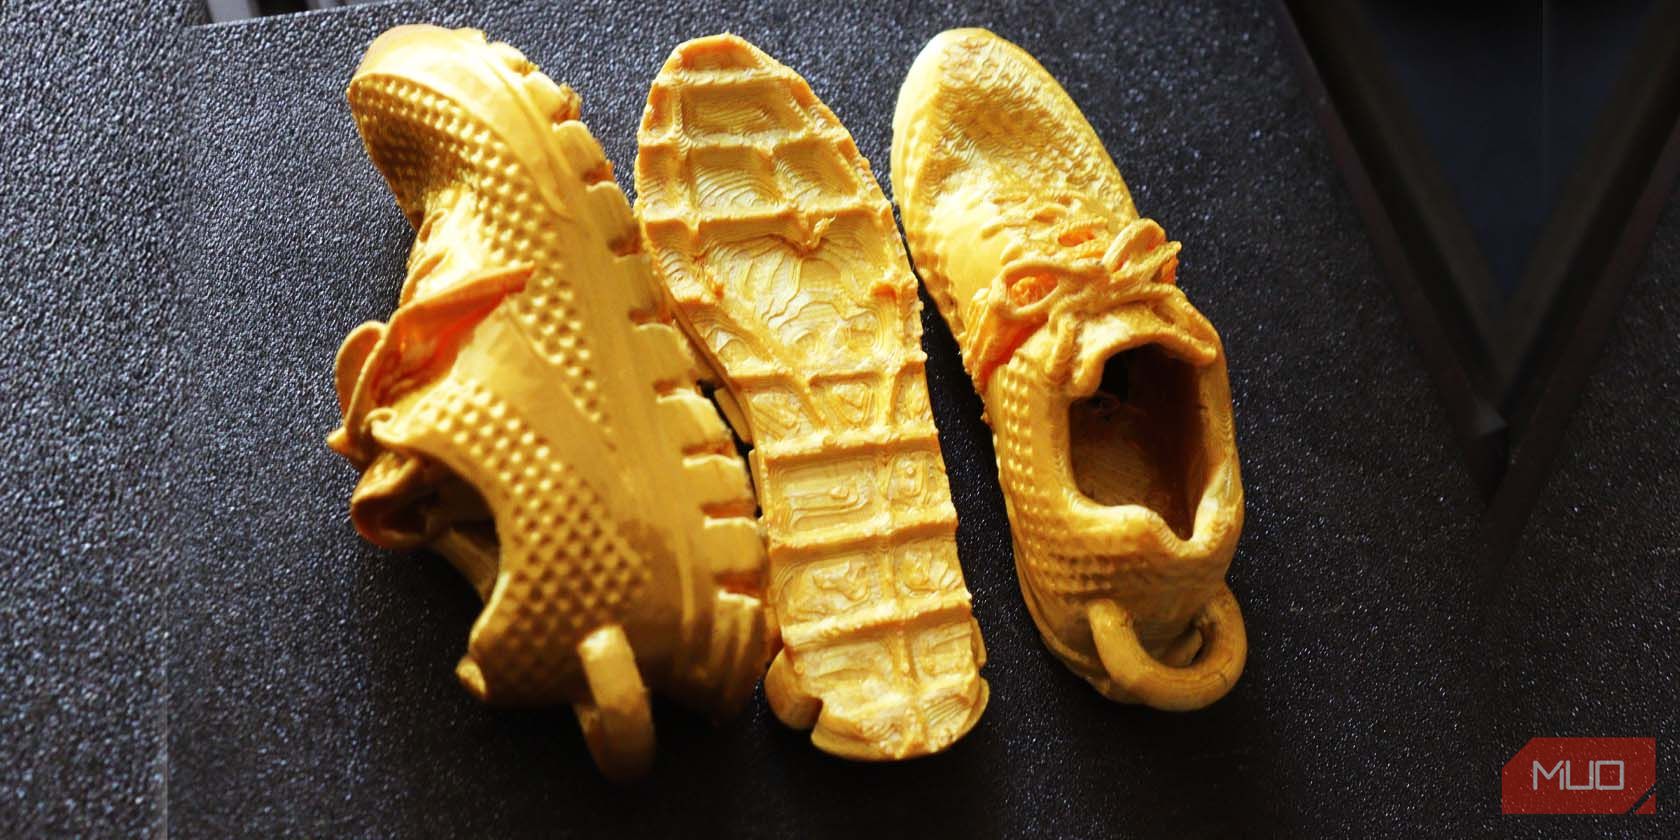 Two 3D printed shoes and a sole